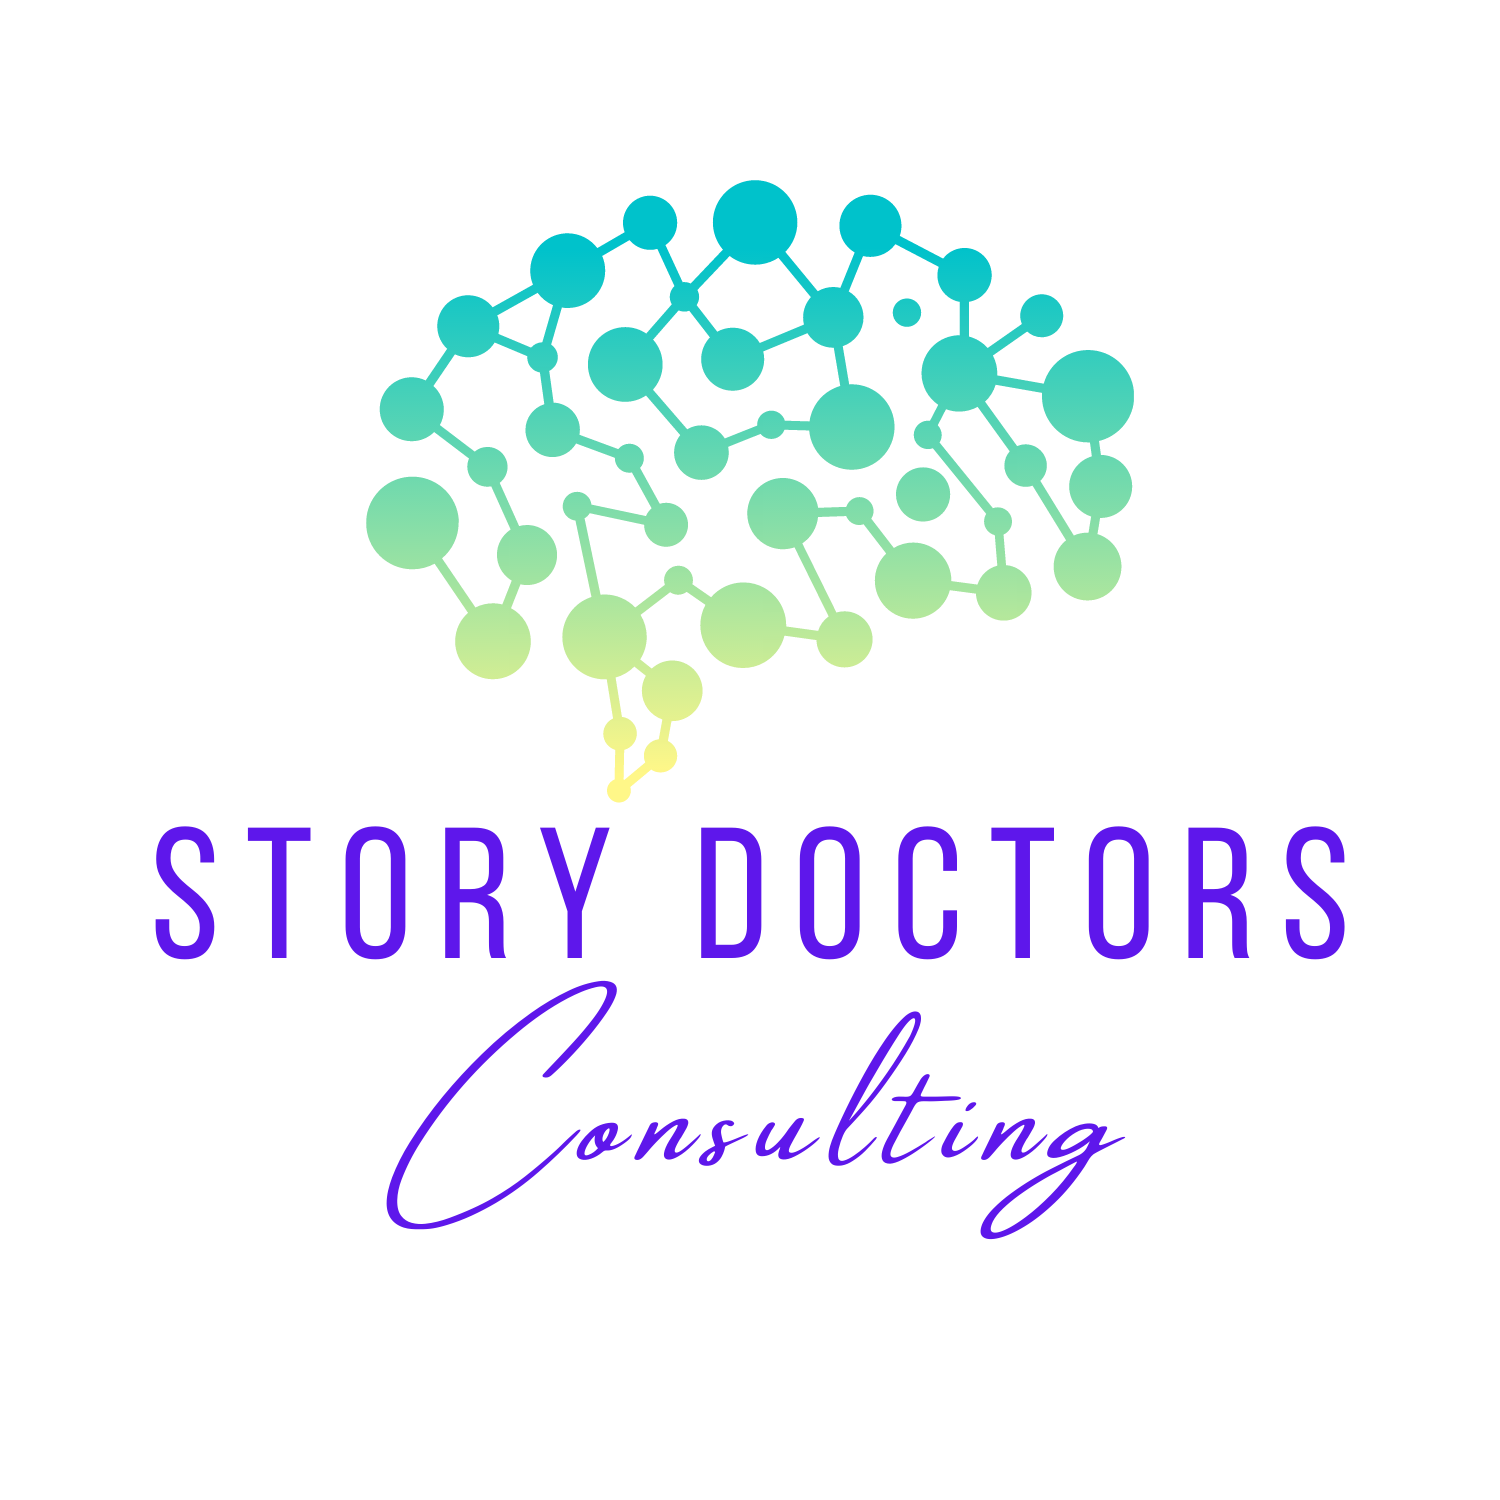 Story Doctors Consulting